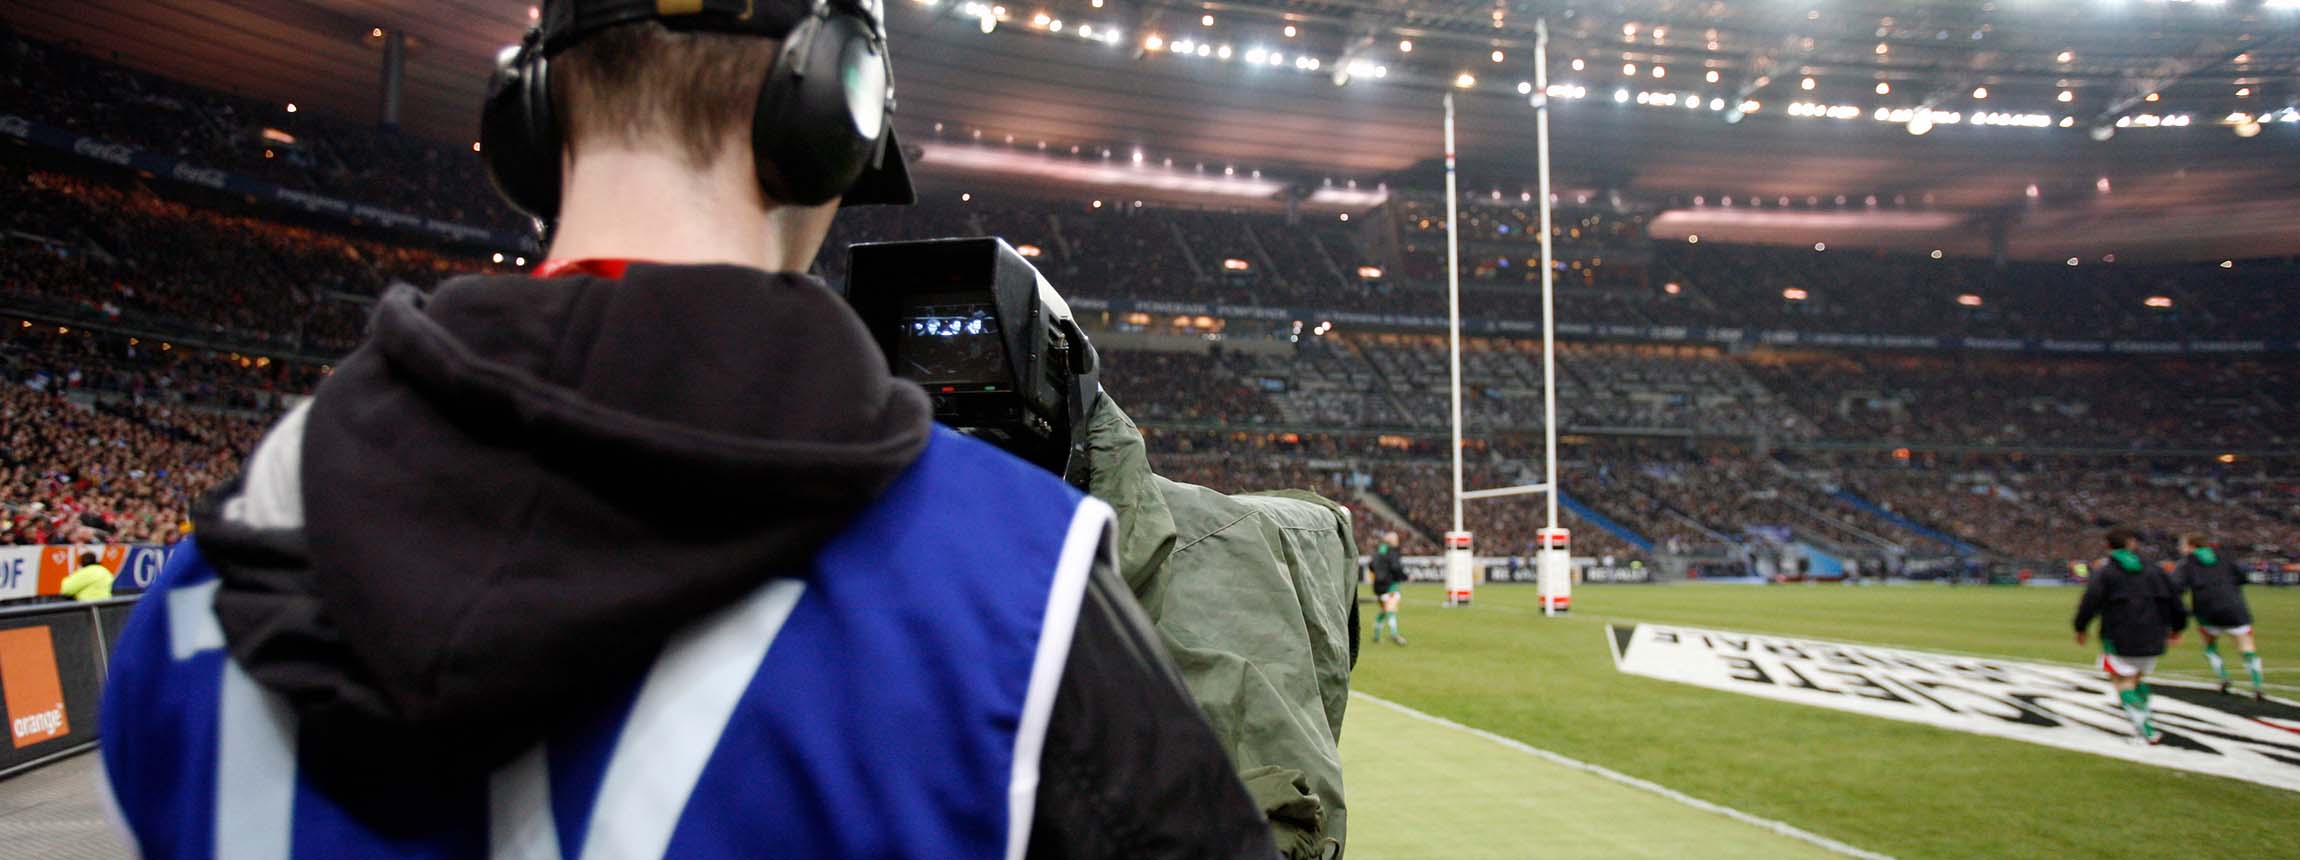 Cameraman at a rugby match